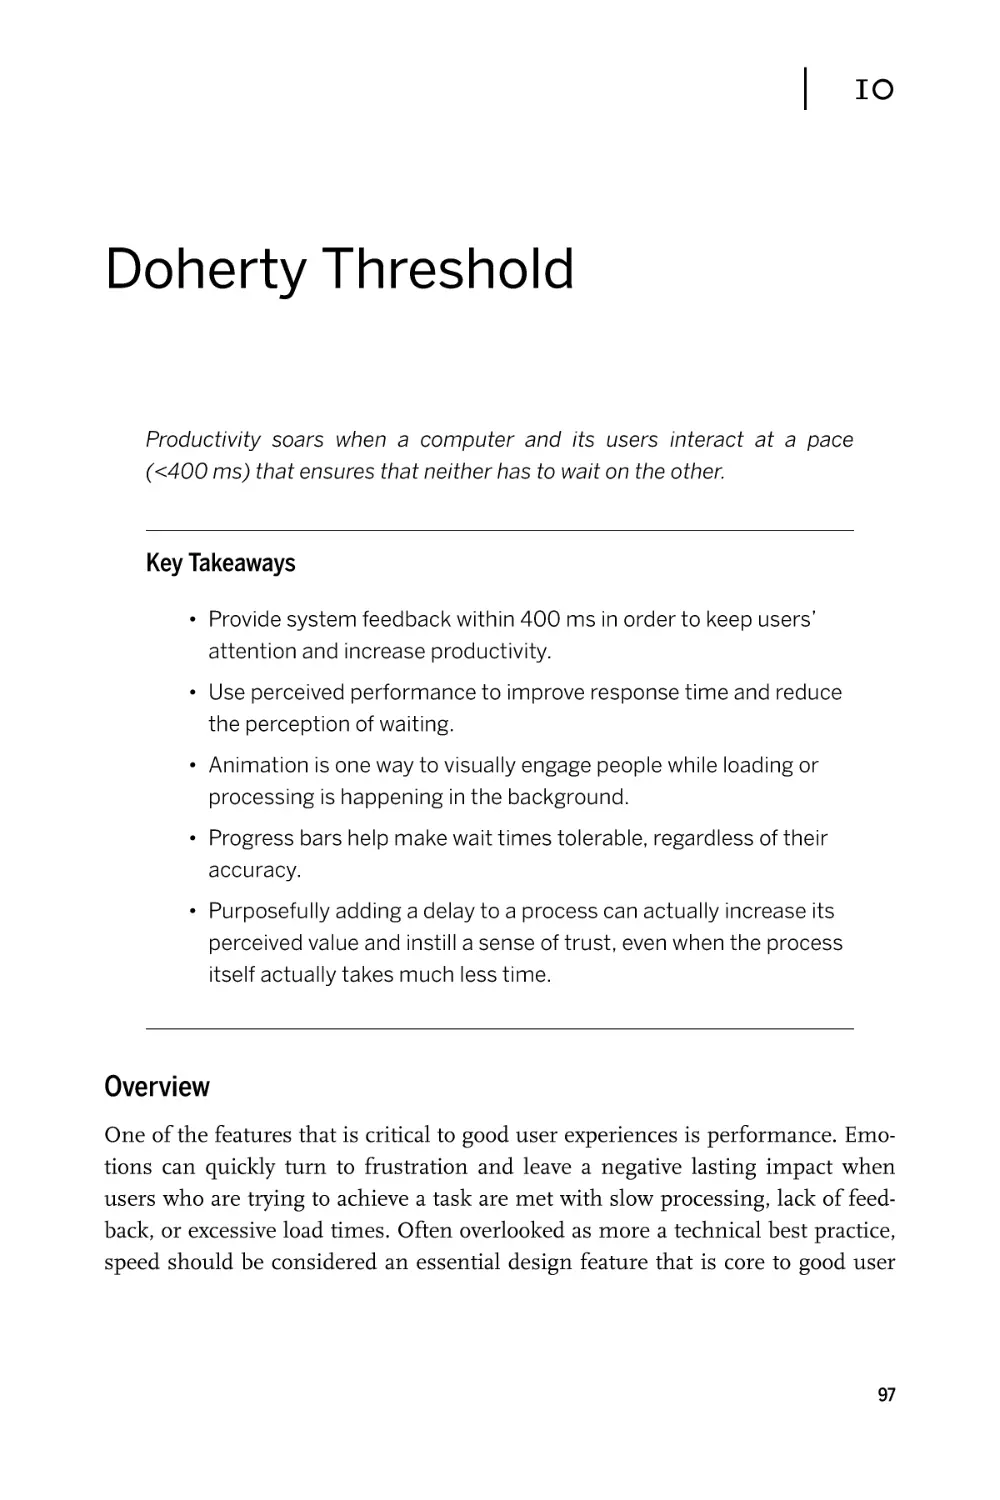 Chapter 10. Doherty Threshold
Overview